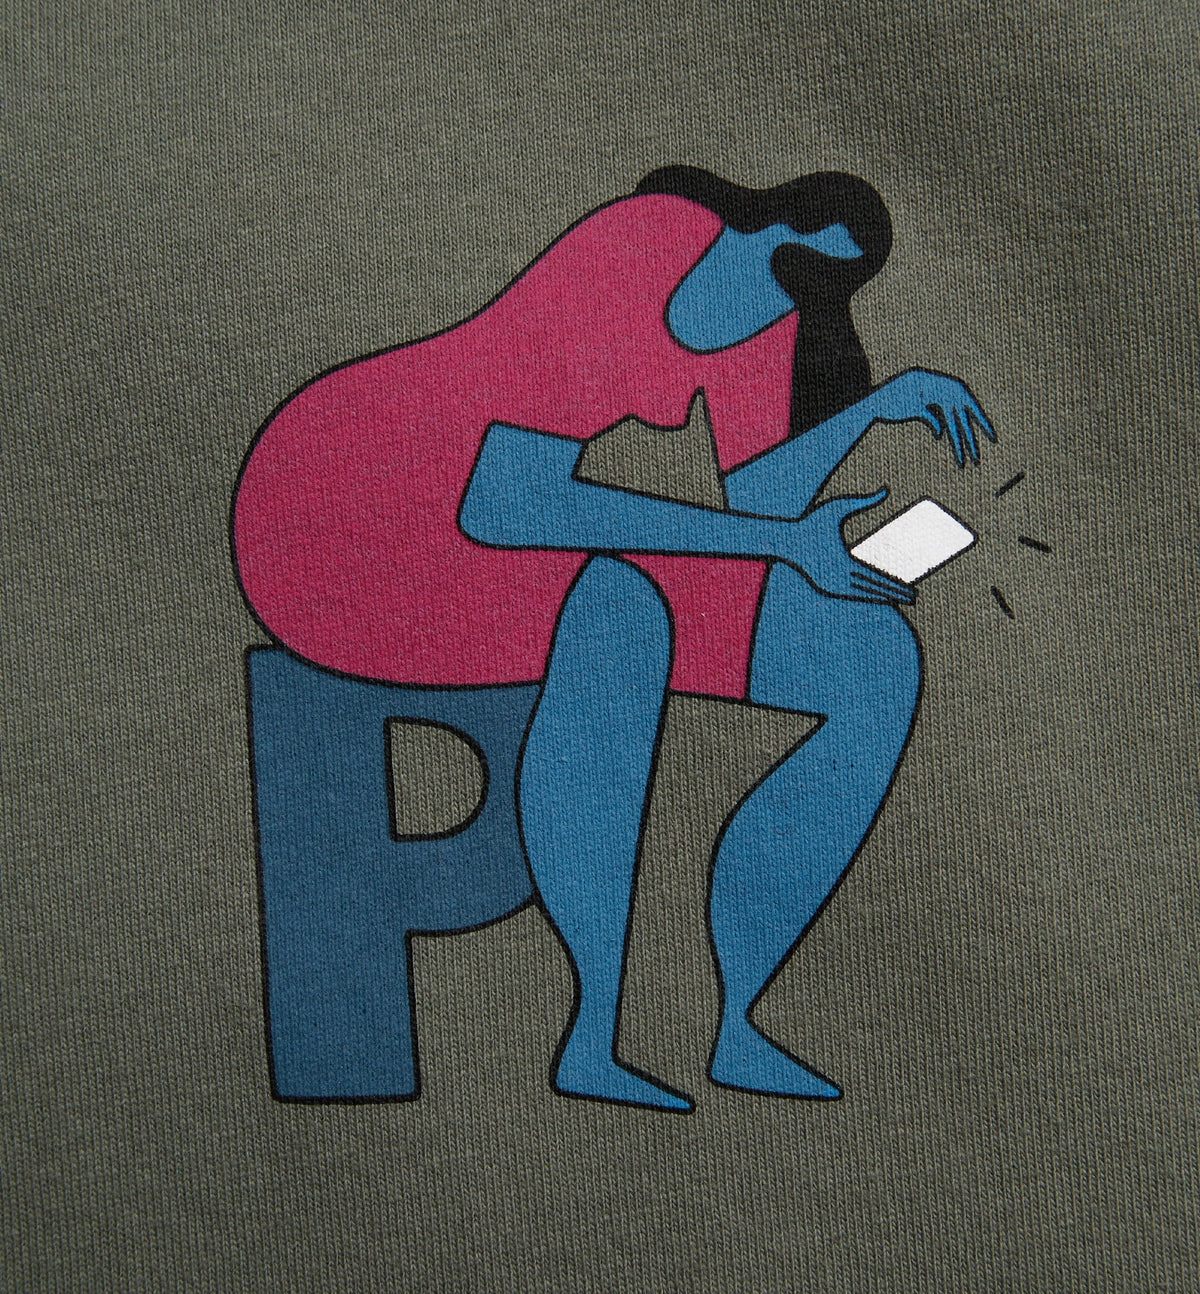 BY PARRA INSECURE DAYS TEE